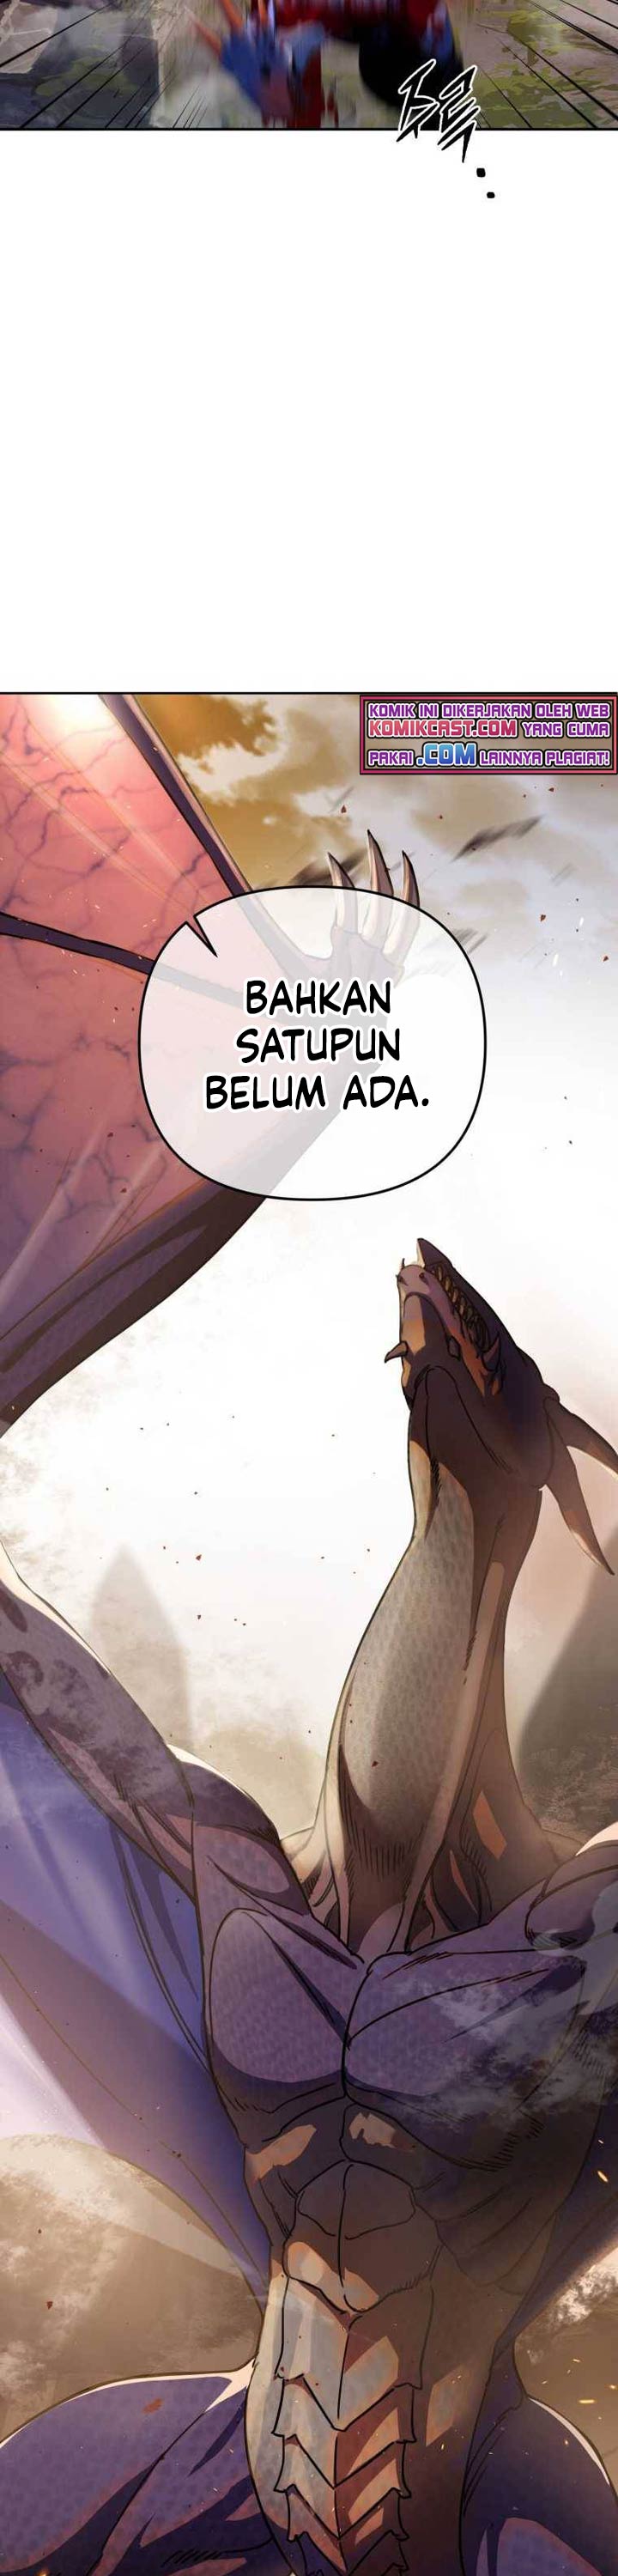 Maxed Out Leveling Chapter 09 Bahasa Indonesia